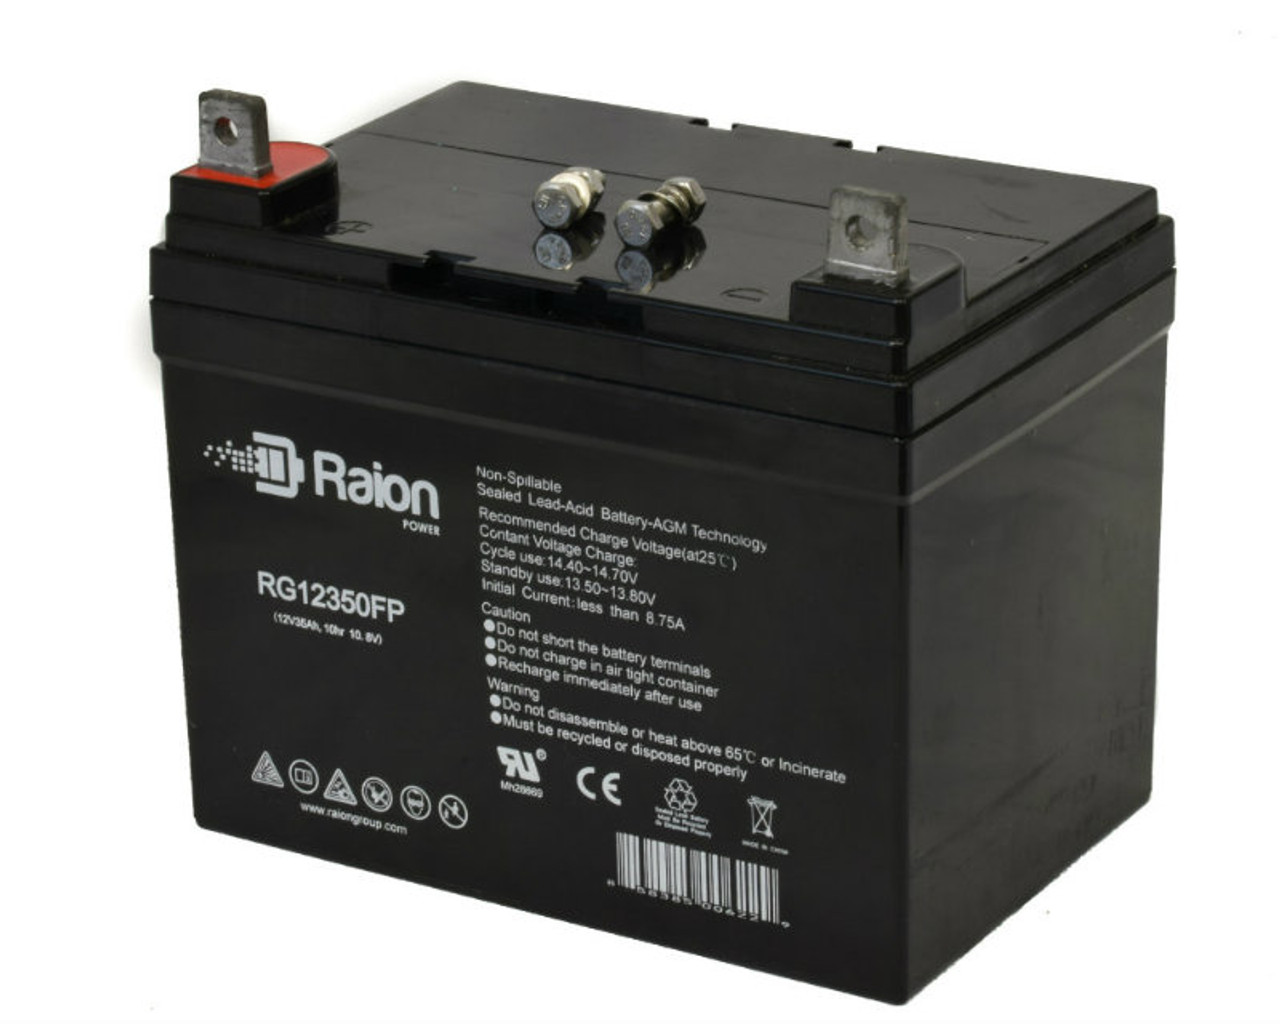 Raion Power Replacement 12V 35Ah RG12350FP Mobility Scooter Battery for Merits Health Products P101-2S-S